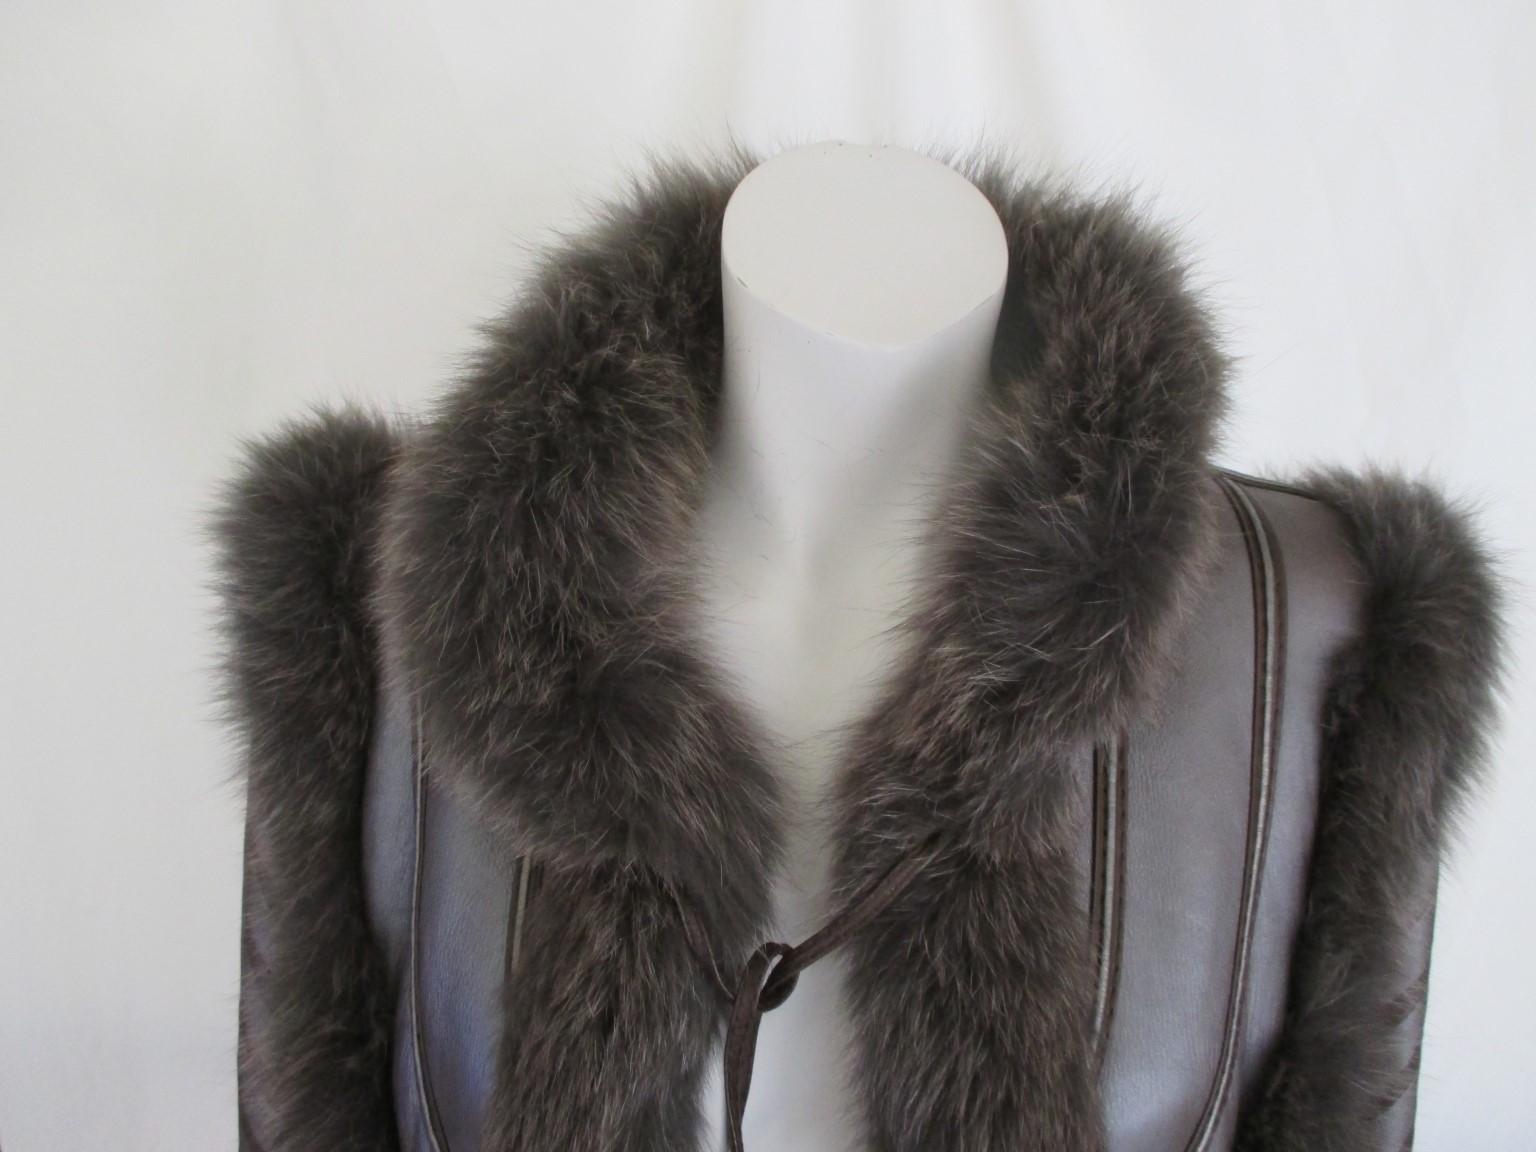 This vintage lamb fur coat is trimmed with fox fur and bronze gold brown leather chevron 

We offer more exclusive fur items, view our frontstore

Details:
With 2 leather pockets, 2 fringe closures and 1 at the collar.
Pre owned condition
Very